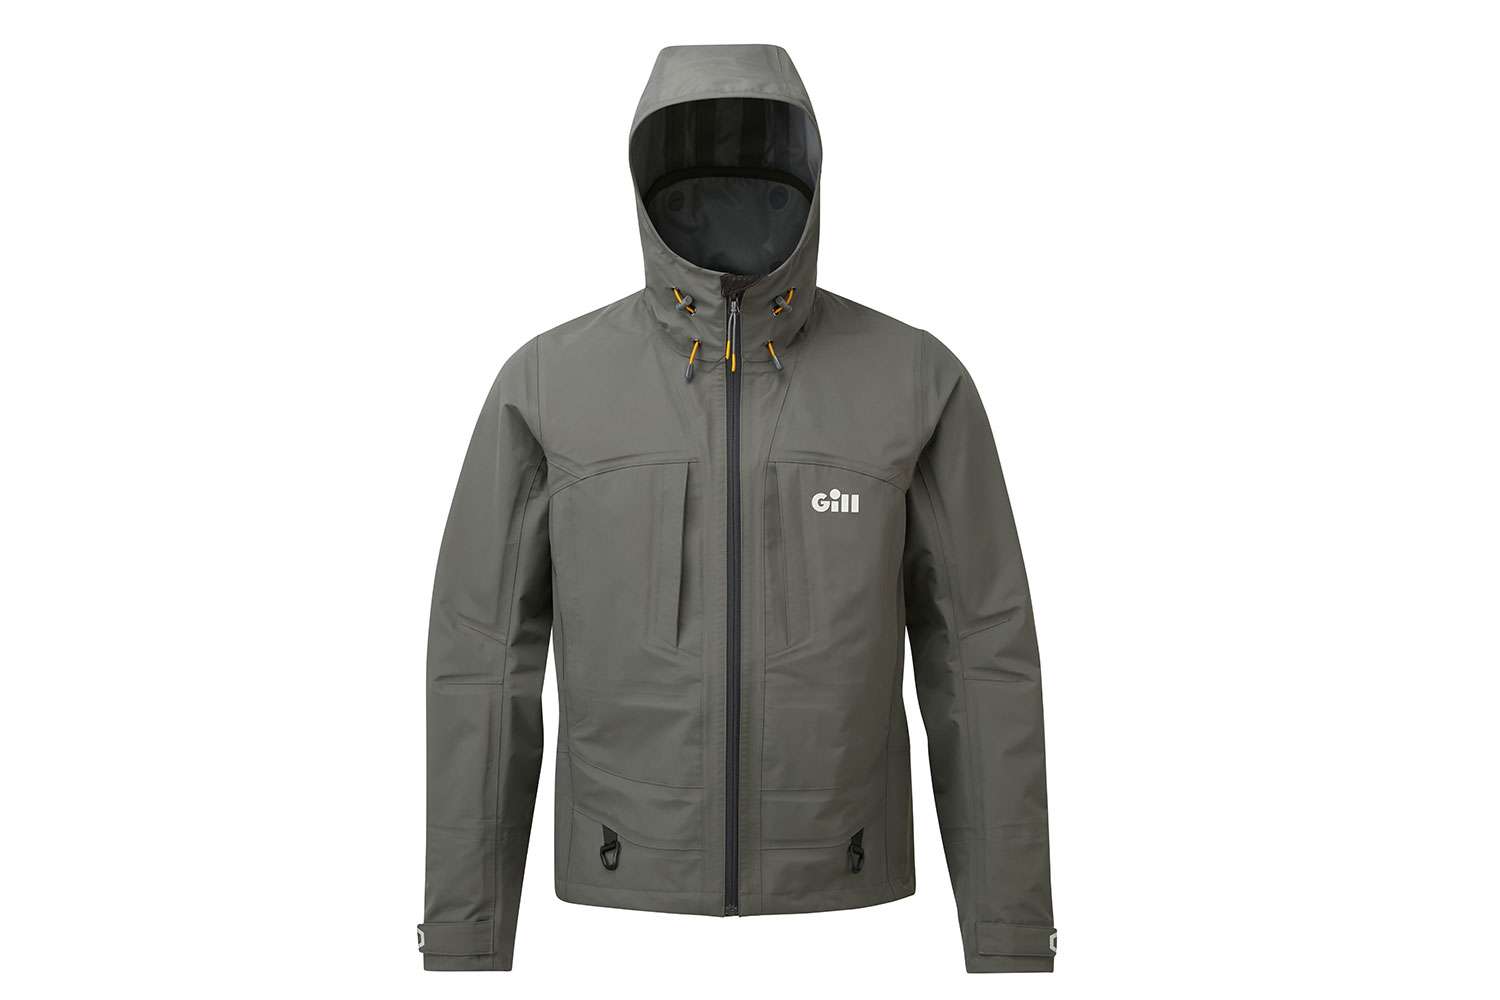    <B>Gill FG100 Jacket</B>
<BR>The new Gill FG100 Jacket represents years of product development and the greatest innovation in fishing jacket design in the company's history. Complete with kill cord attachment loops, and adjustable Vortex Hood System, and reflective accents, this 3-layer jacket is guaranteed to keep you warm and waterproof while on the water. This new product for the fishing market comes in two new colors (graphite/taupe) for optimum coordination on and around the water. 
<BR>
<B>MSRP: $349</B>

<BR>
<a href=